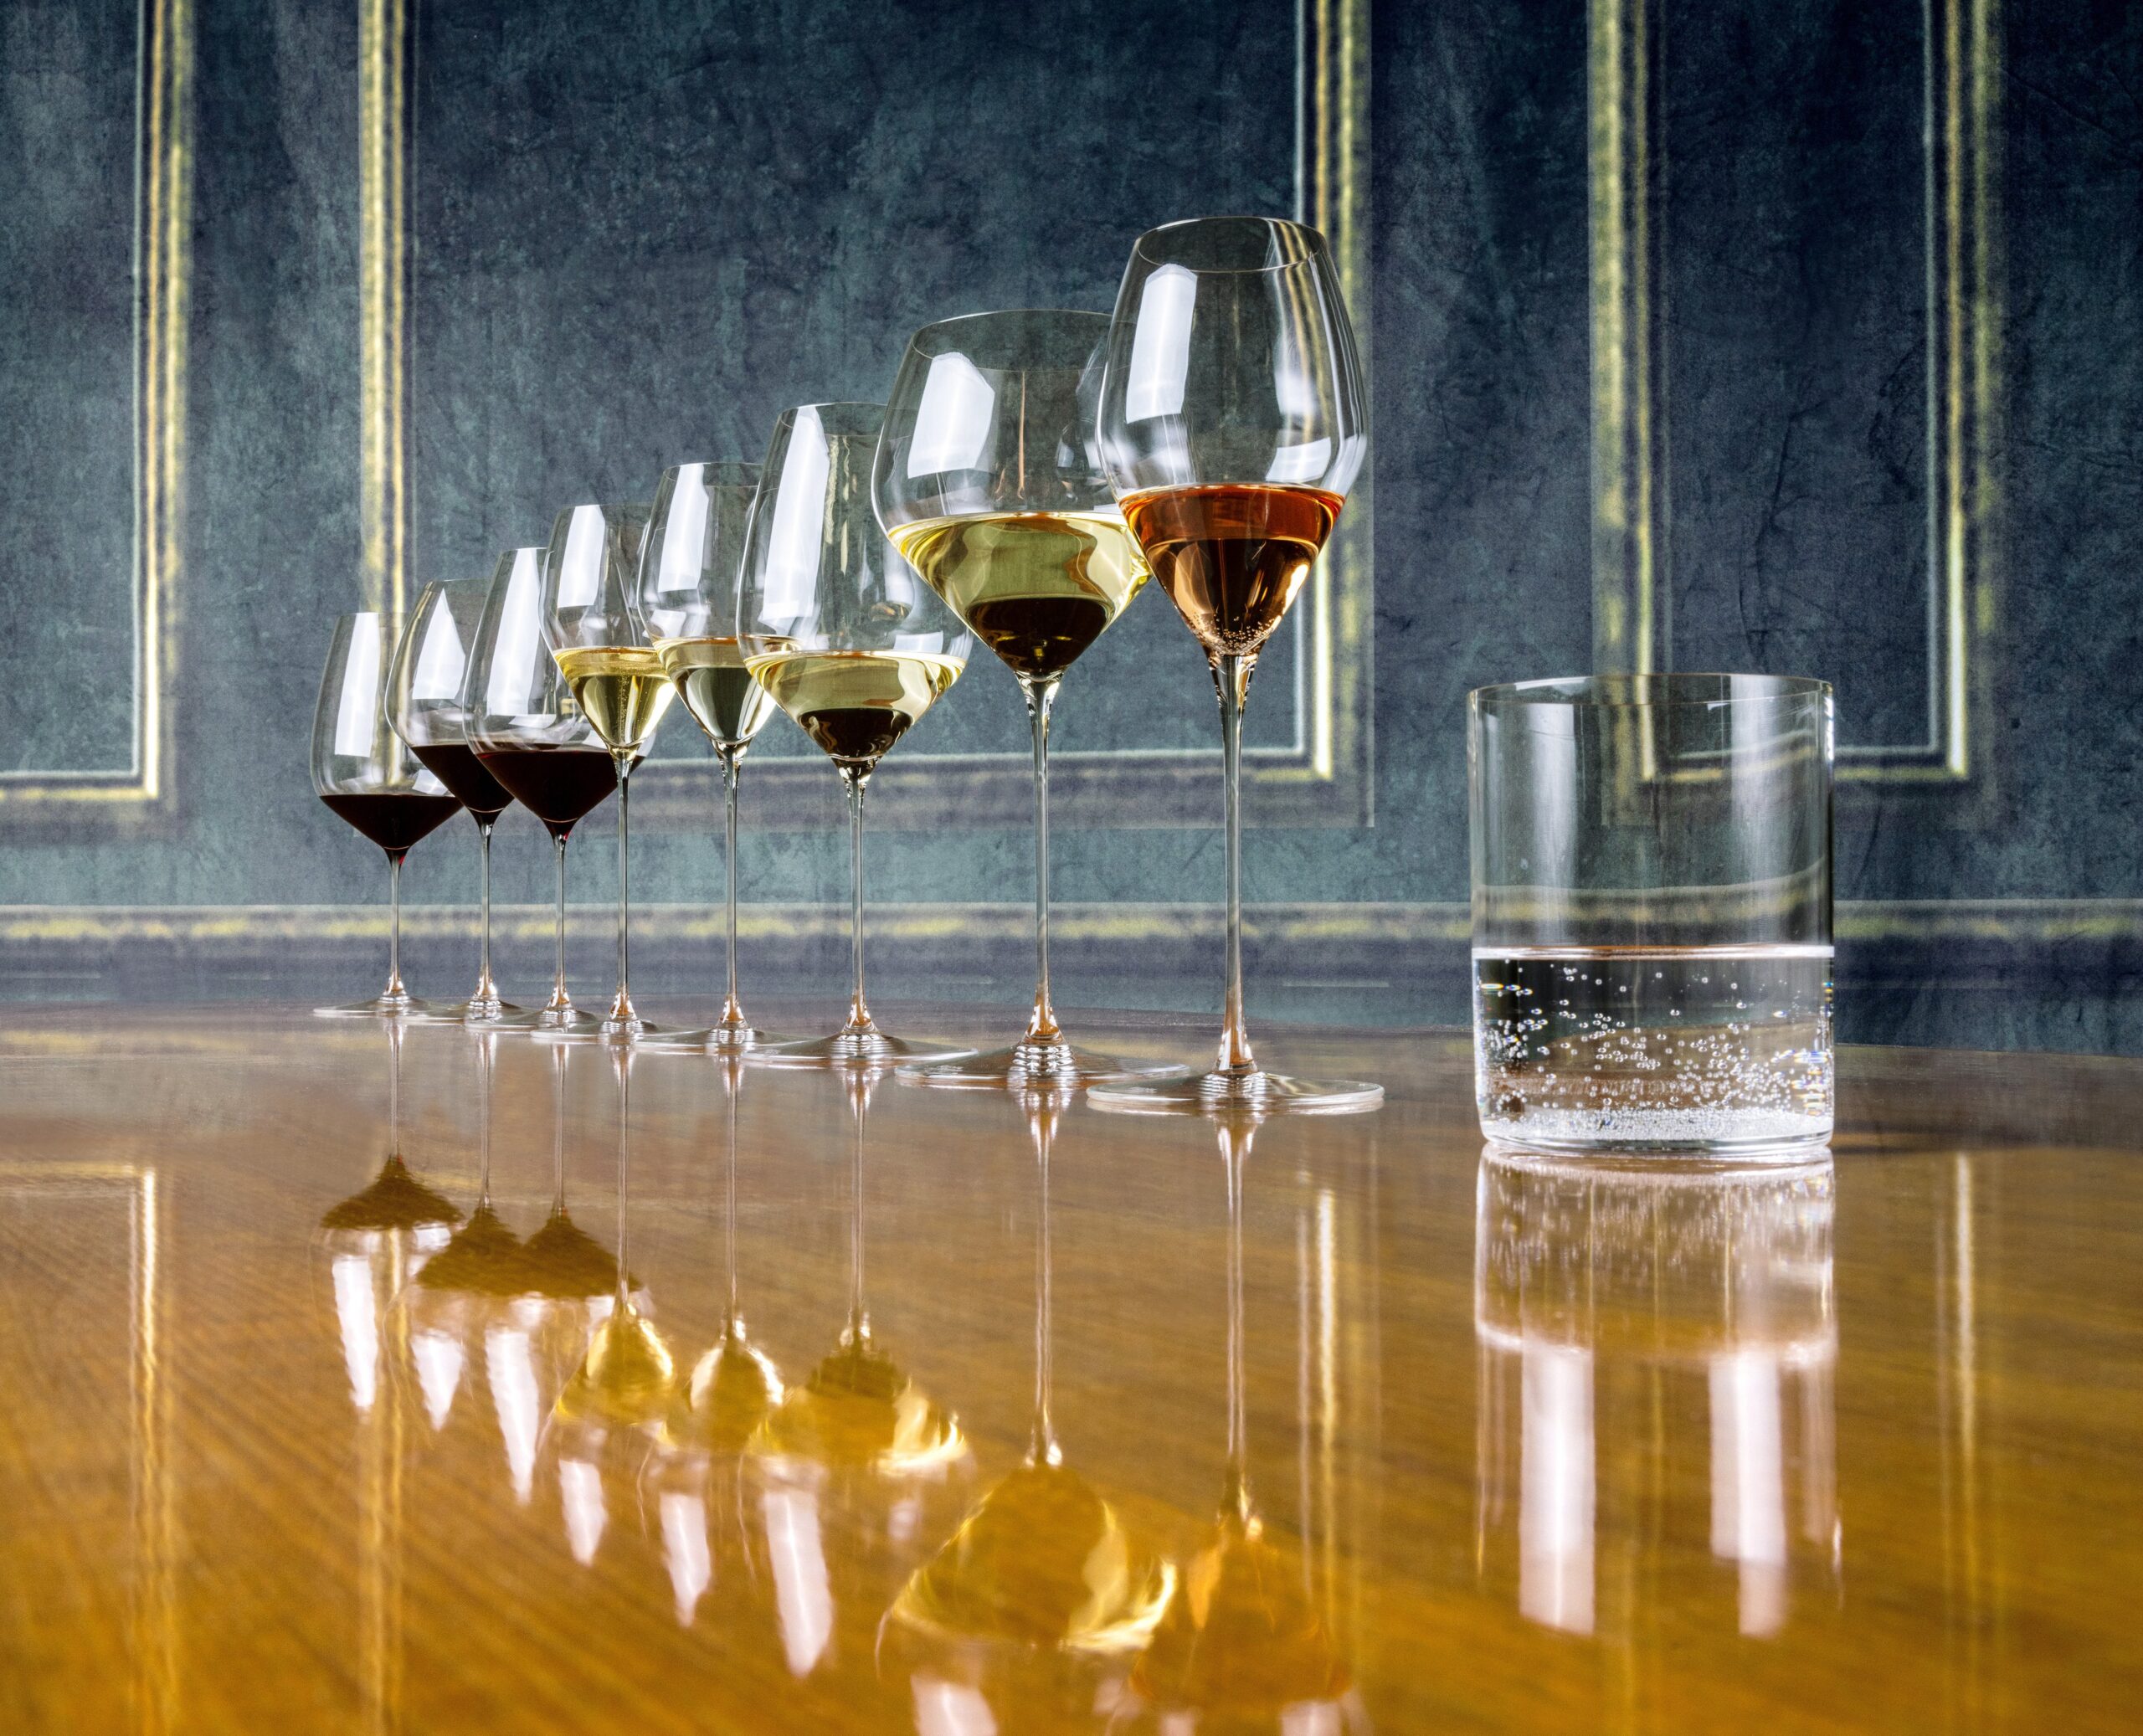 Image of Riedel Veloce Tasting Set wine glasses on a wooden table